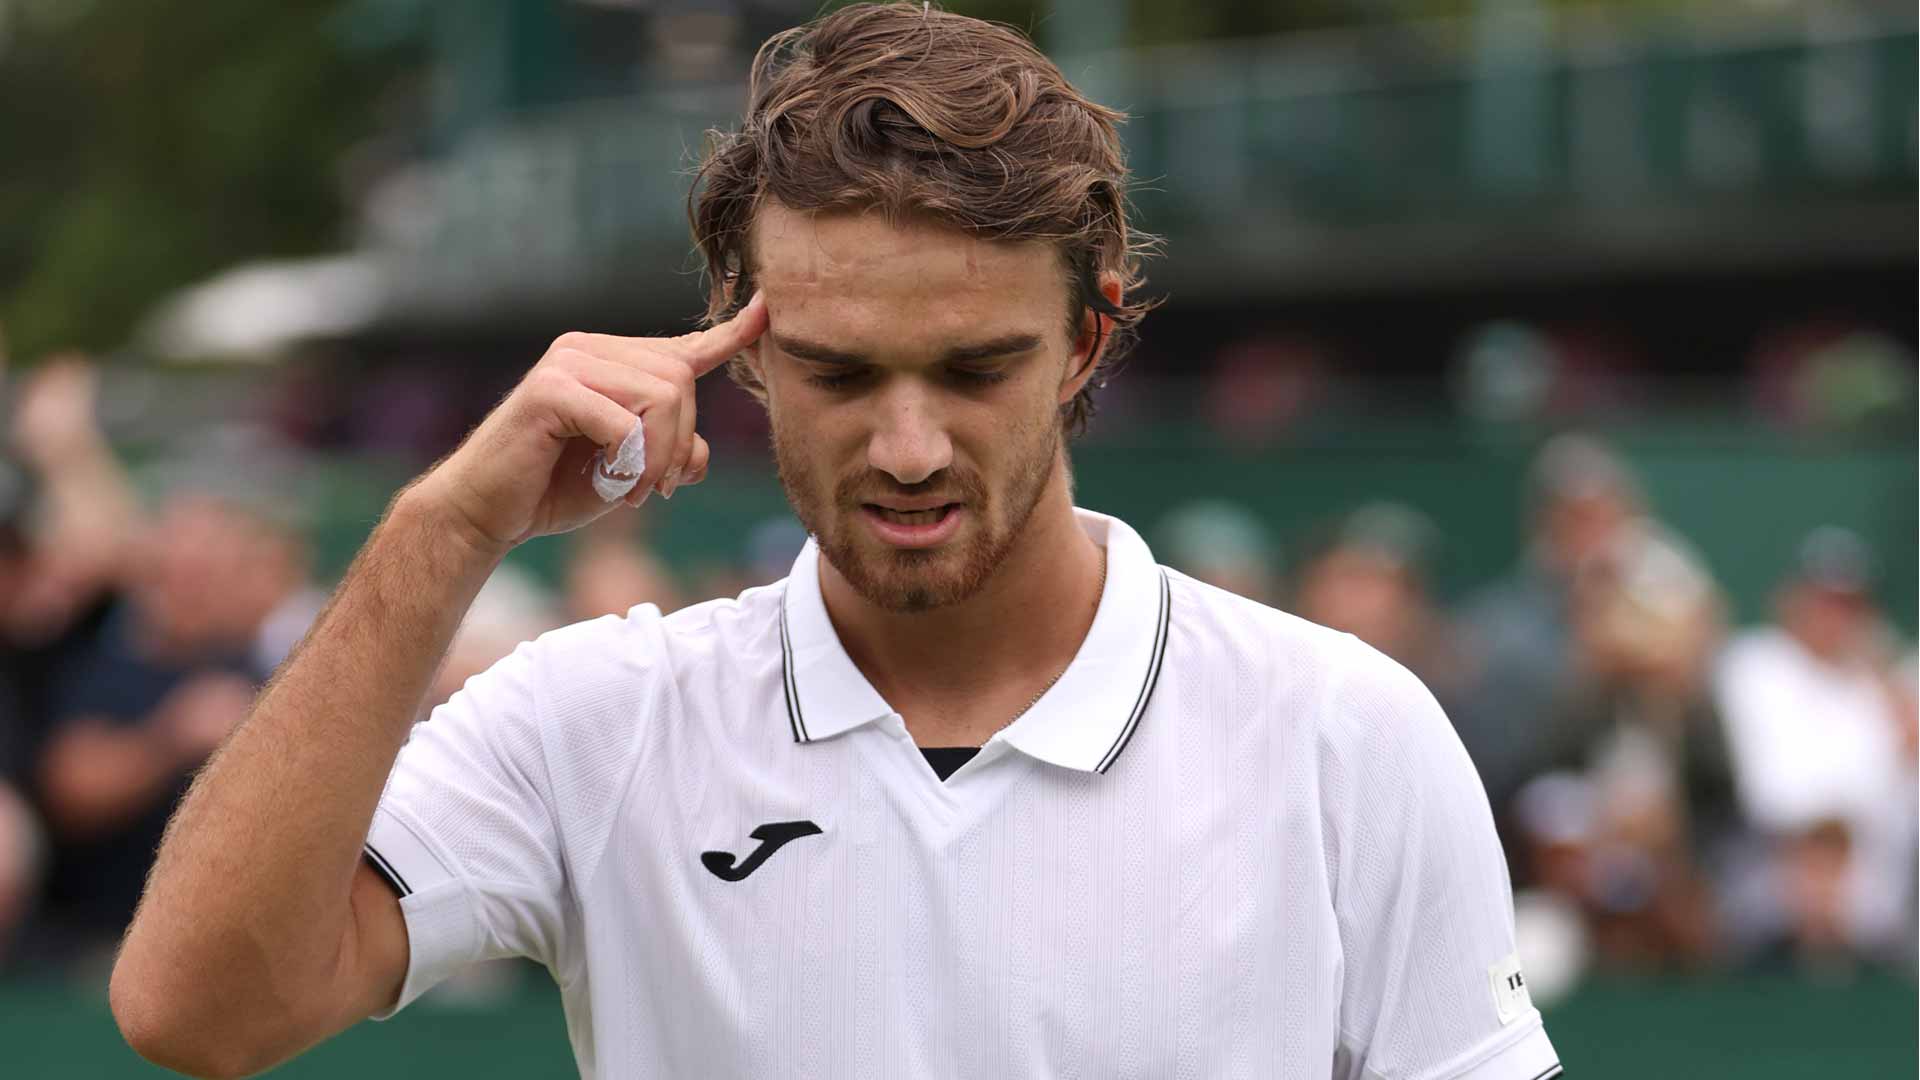 Tomas Machac defeats David Goffin in five sets in the first round at Wimbledon.